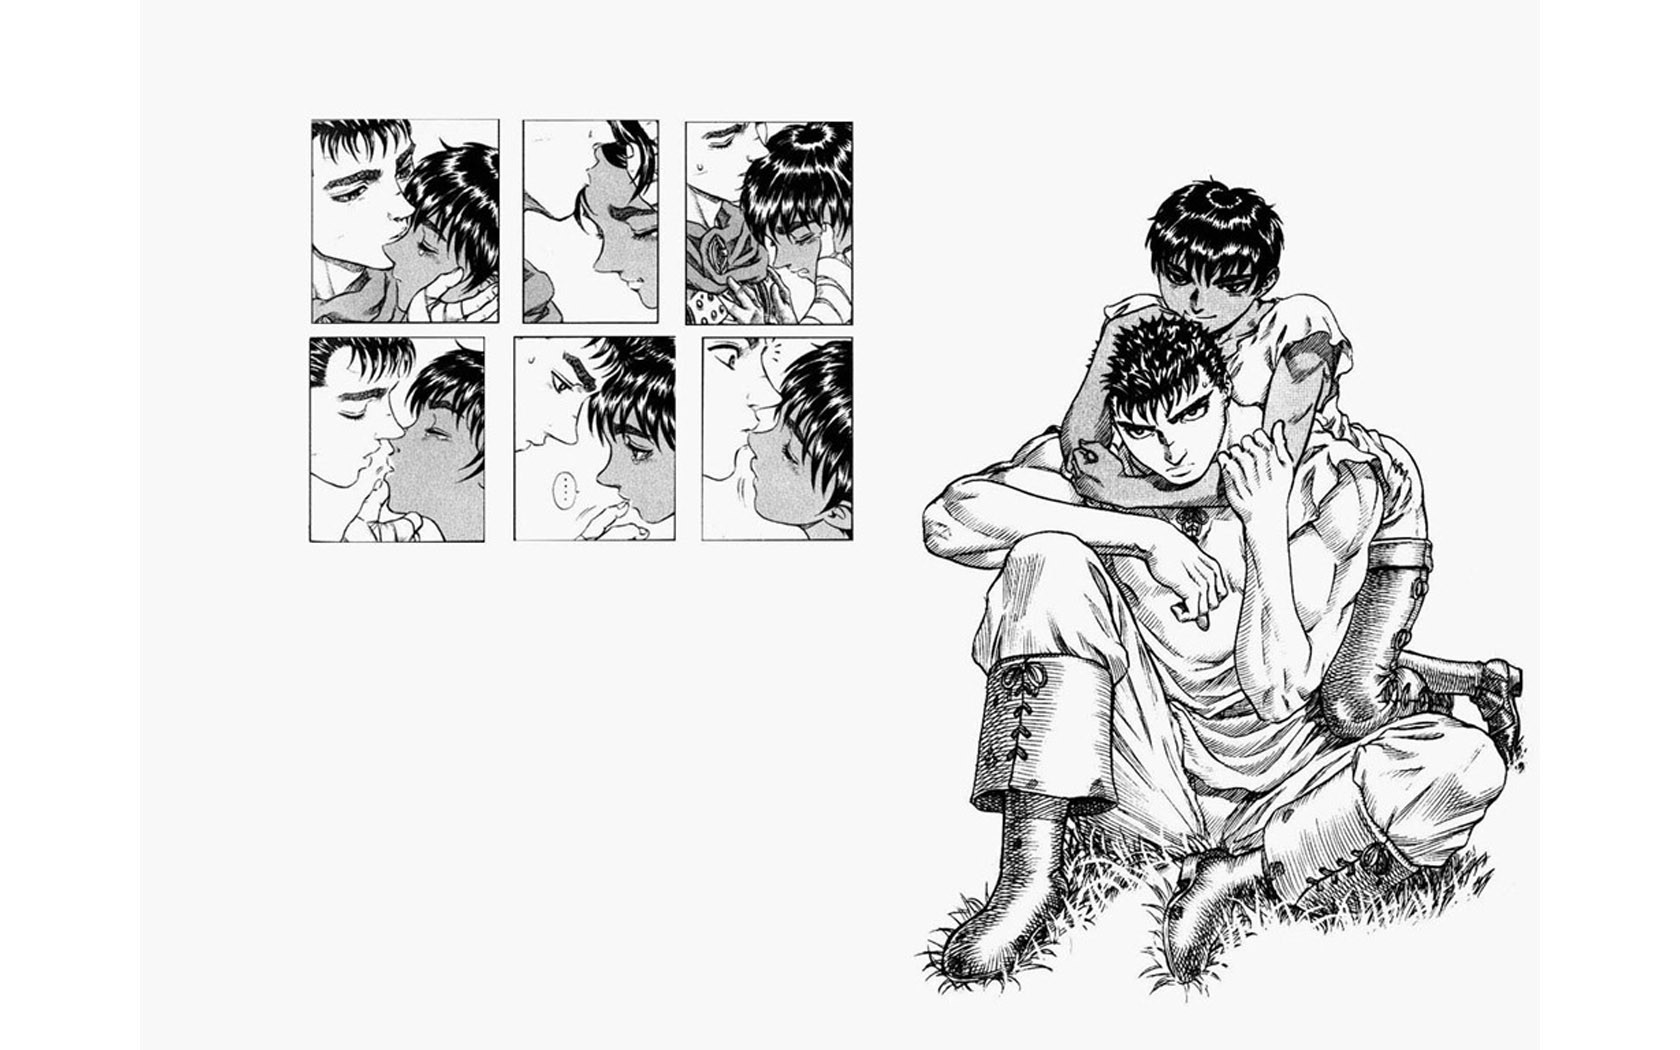 Was looking for Casca wallpapers, best one i found so far : r/Berserk